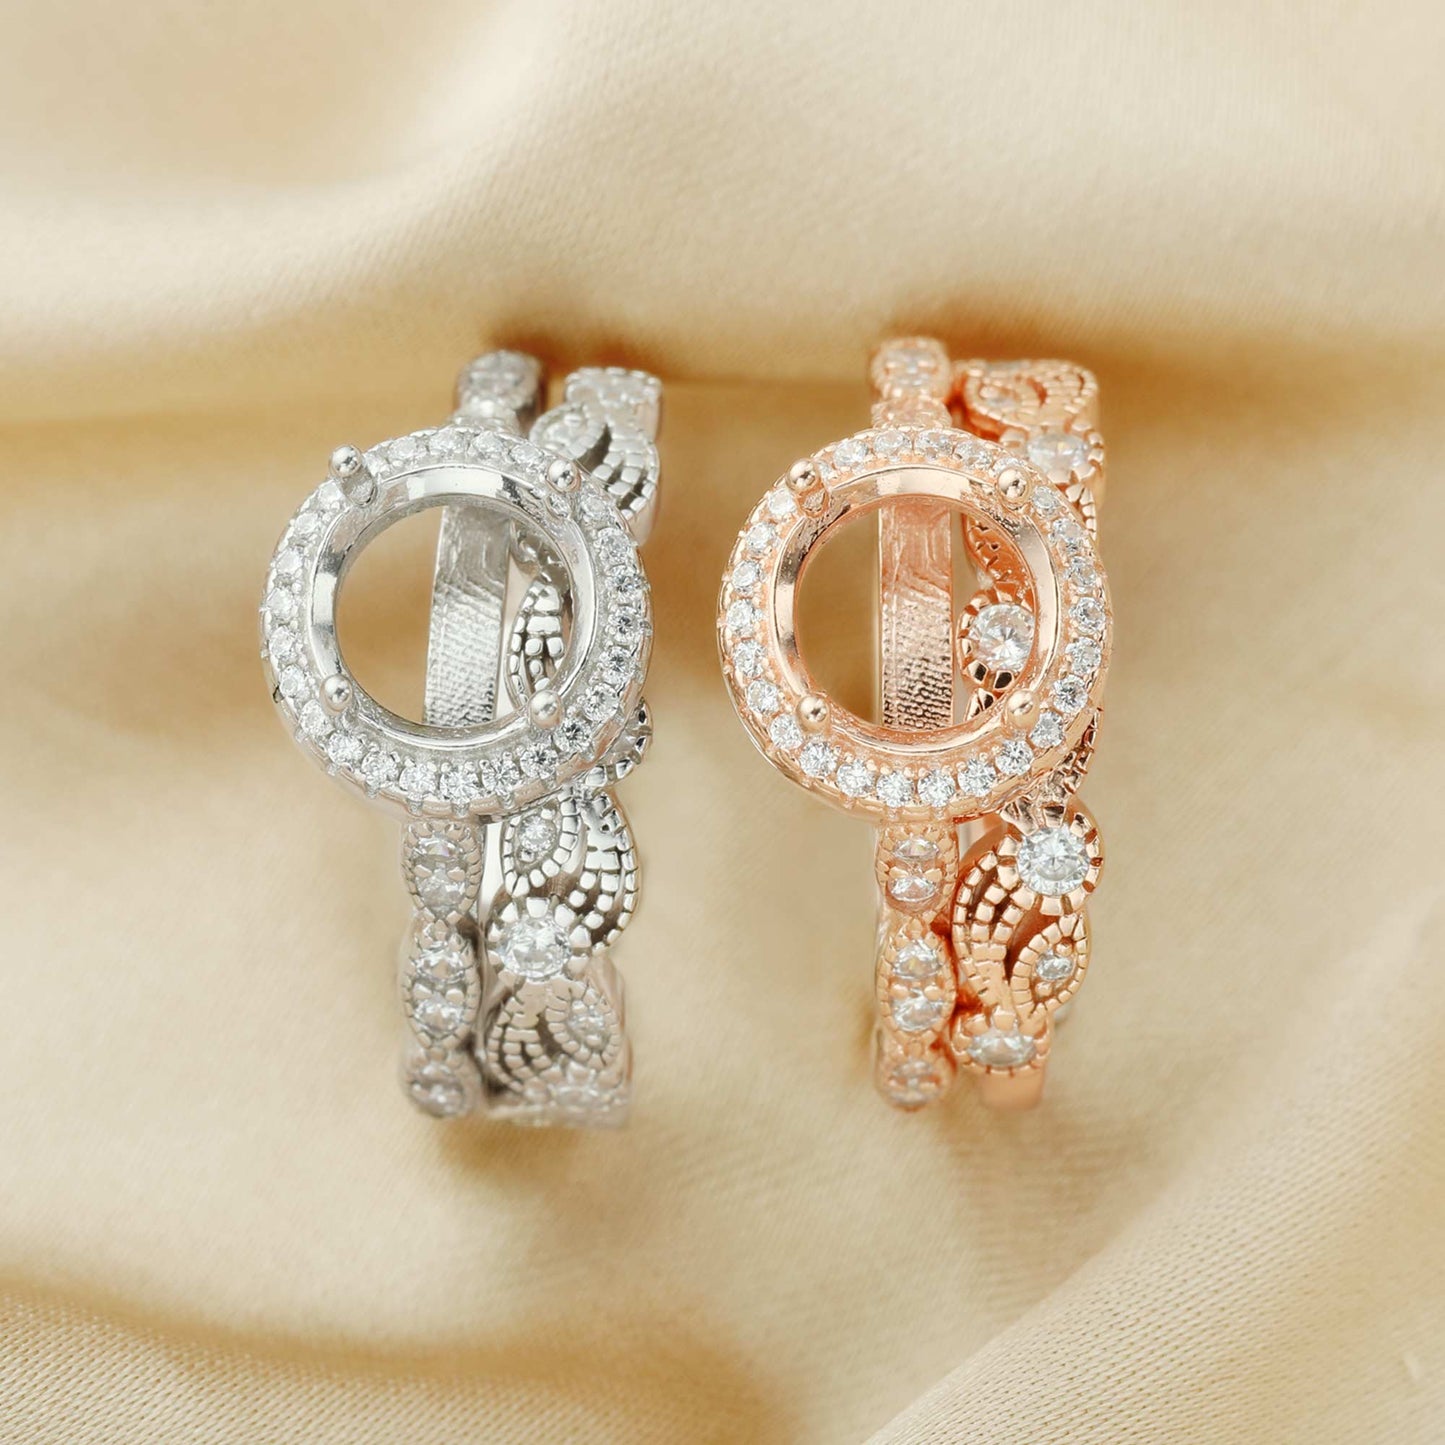 One silver and one rose gold art deco style halo semi mount with a filigree wave and gem studded design wedding bands.